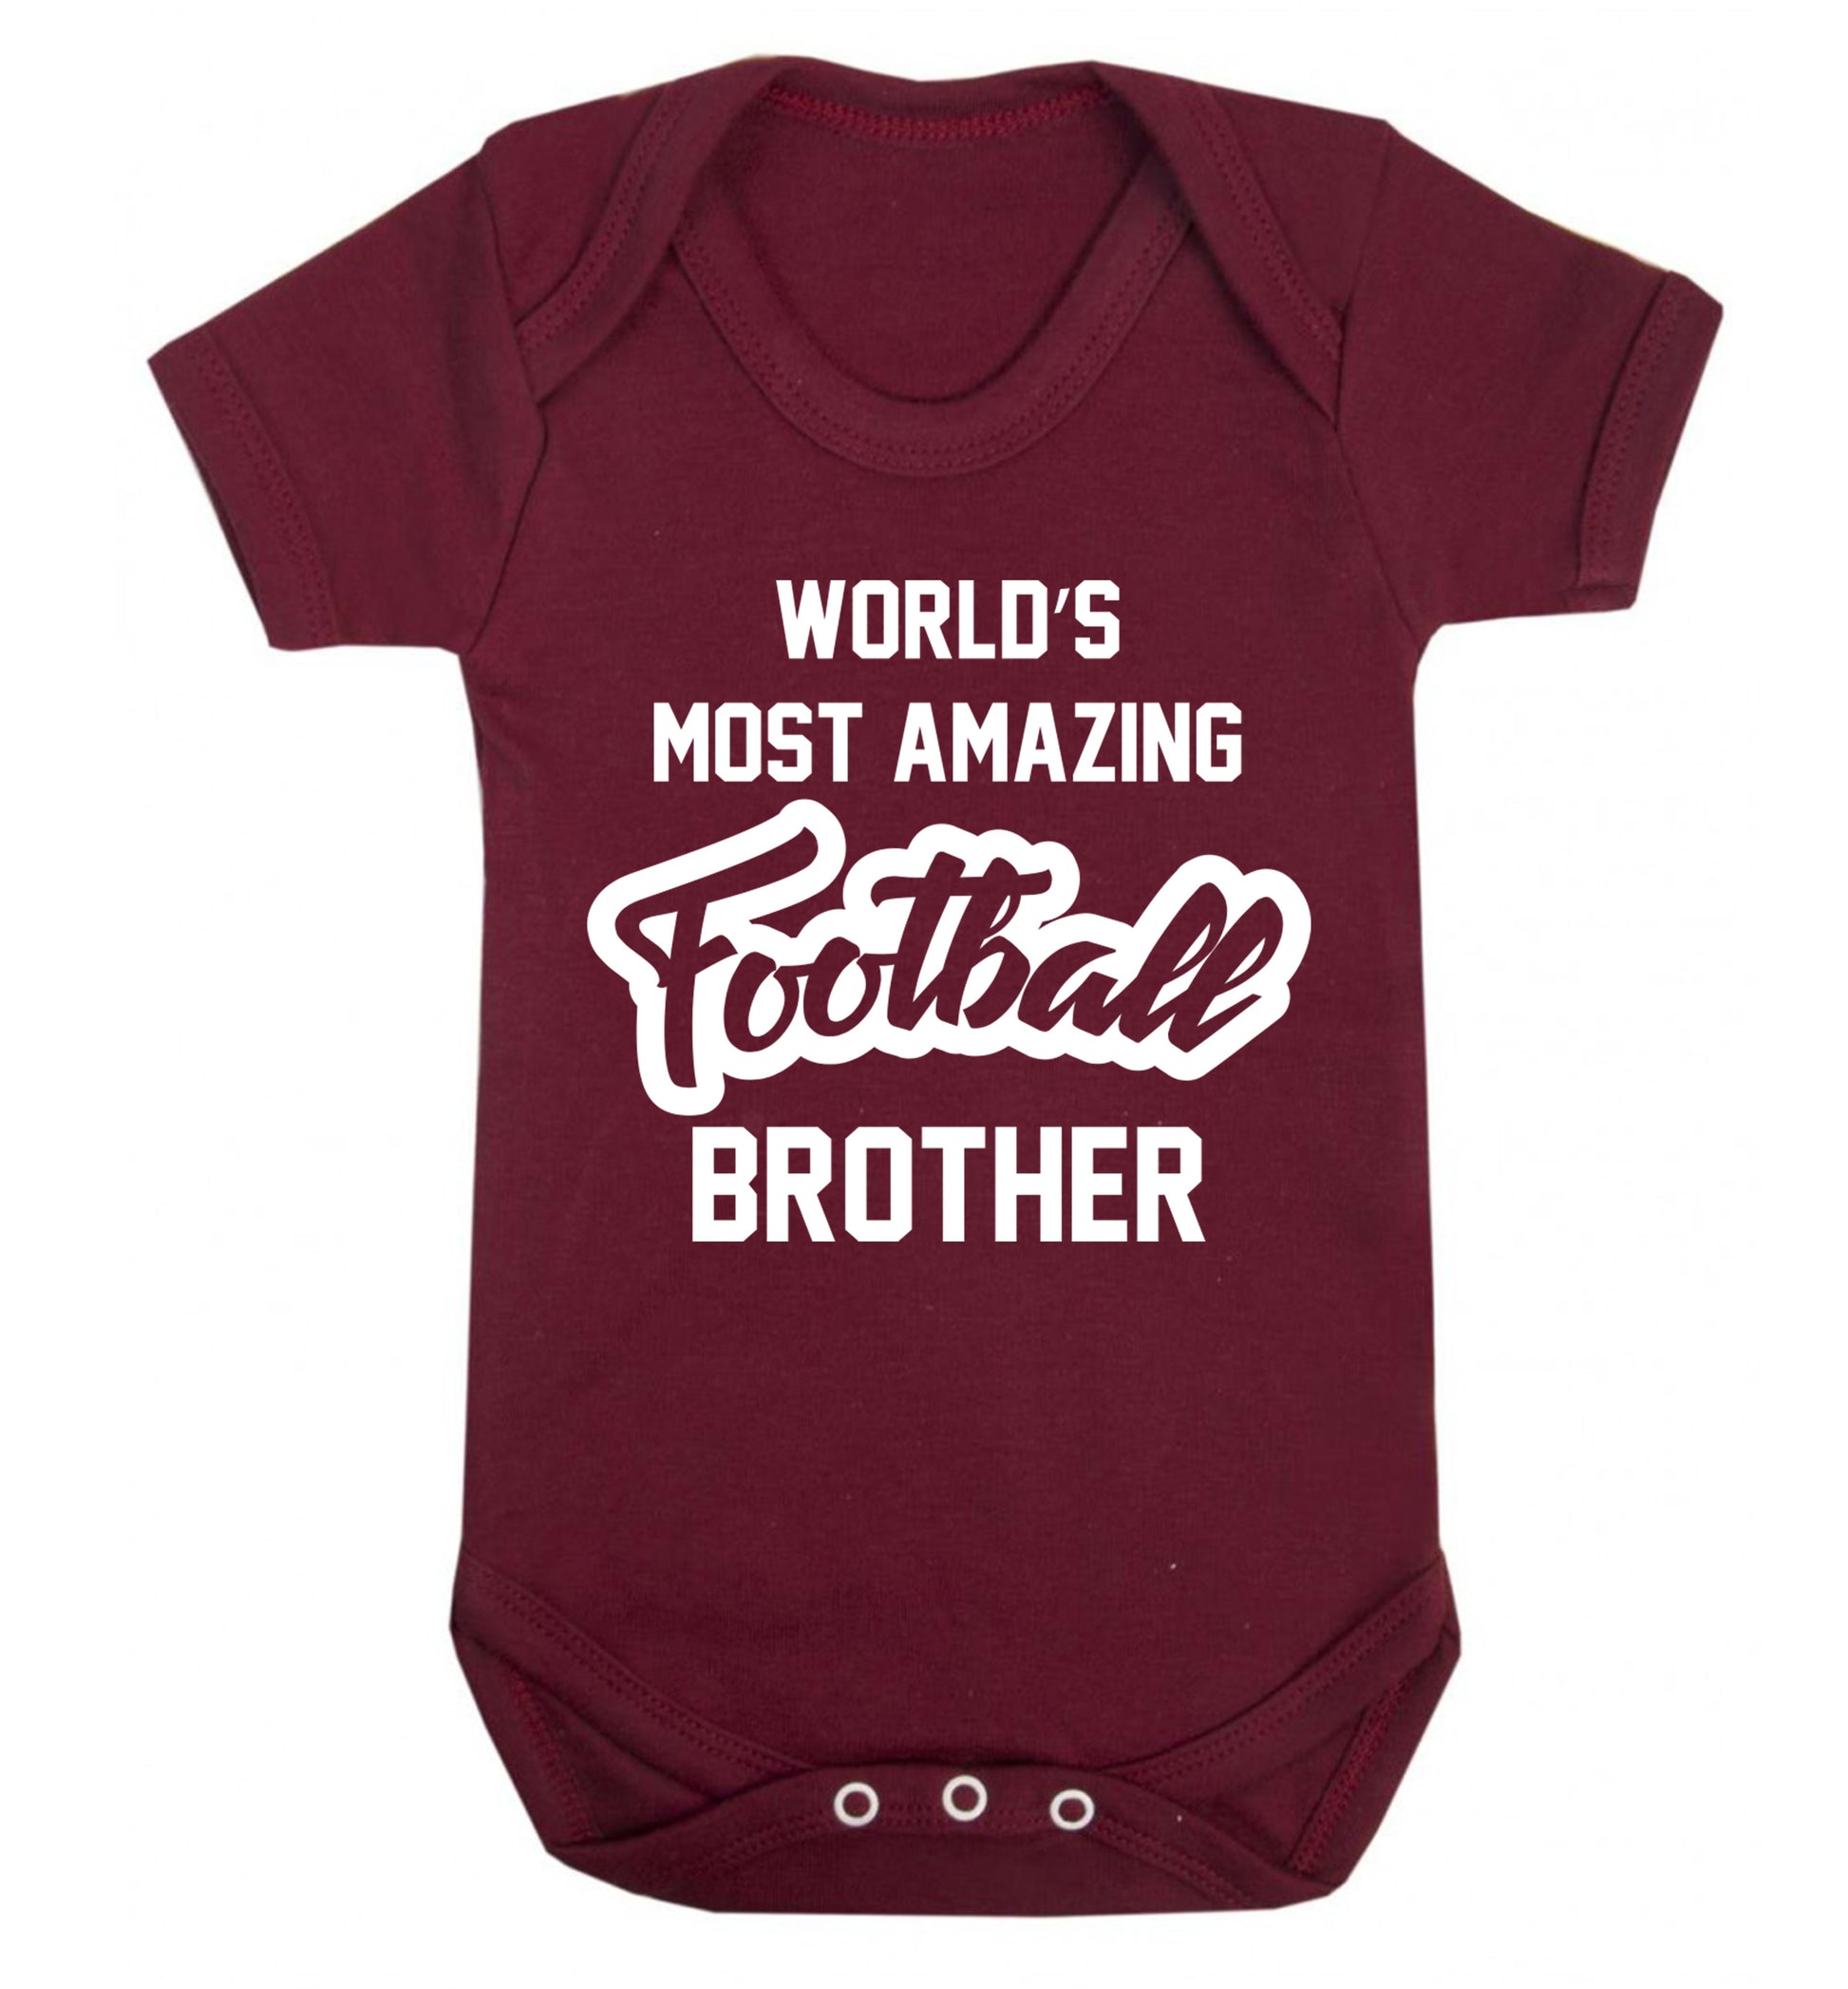 Worlds most amazing football brother Baby Vest maroon 18-24 months